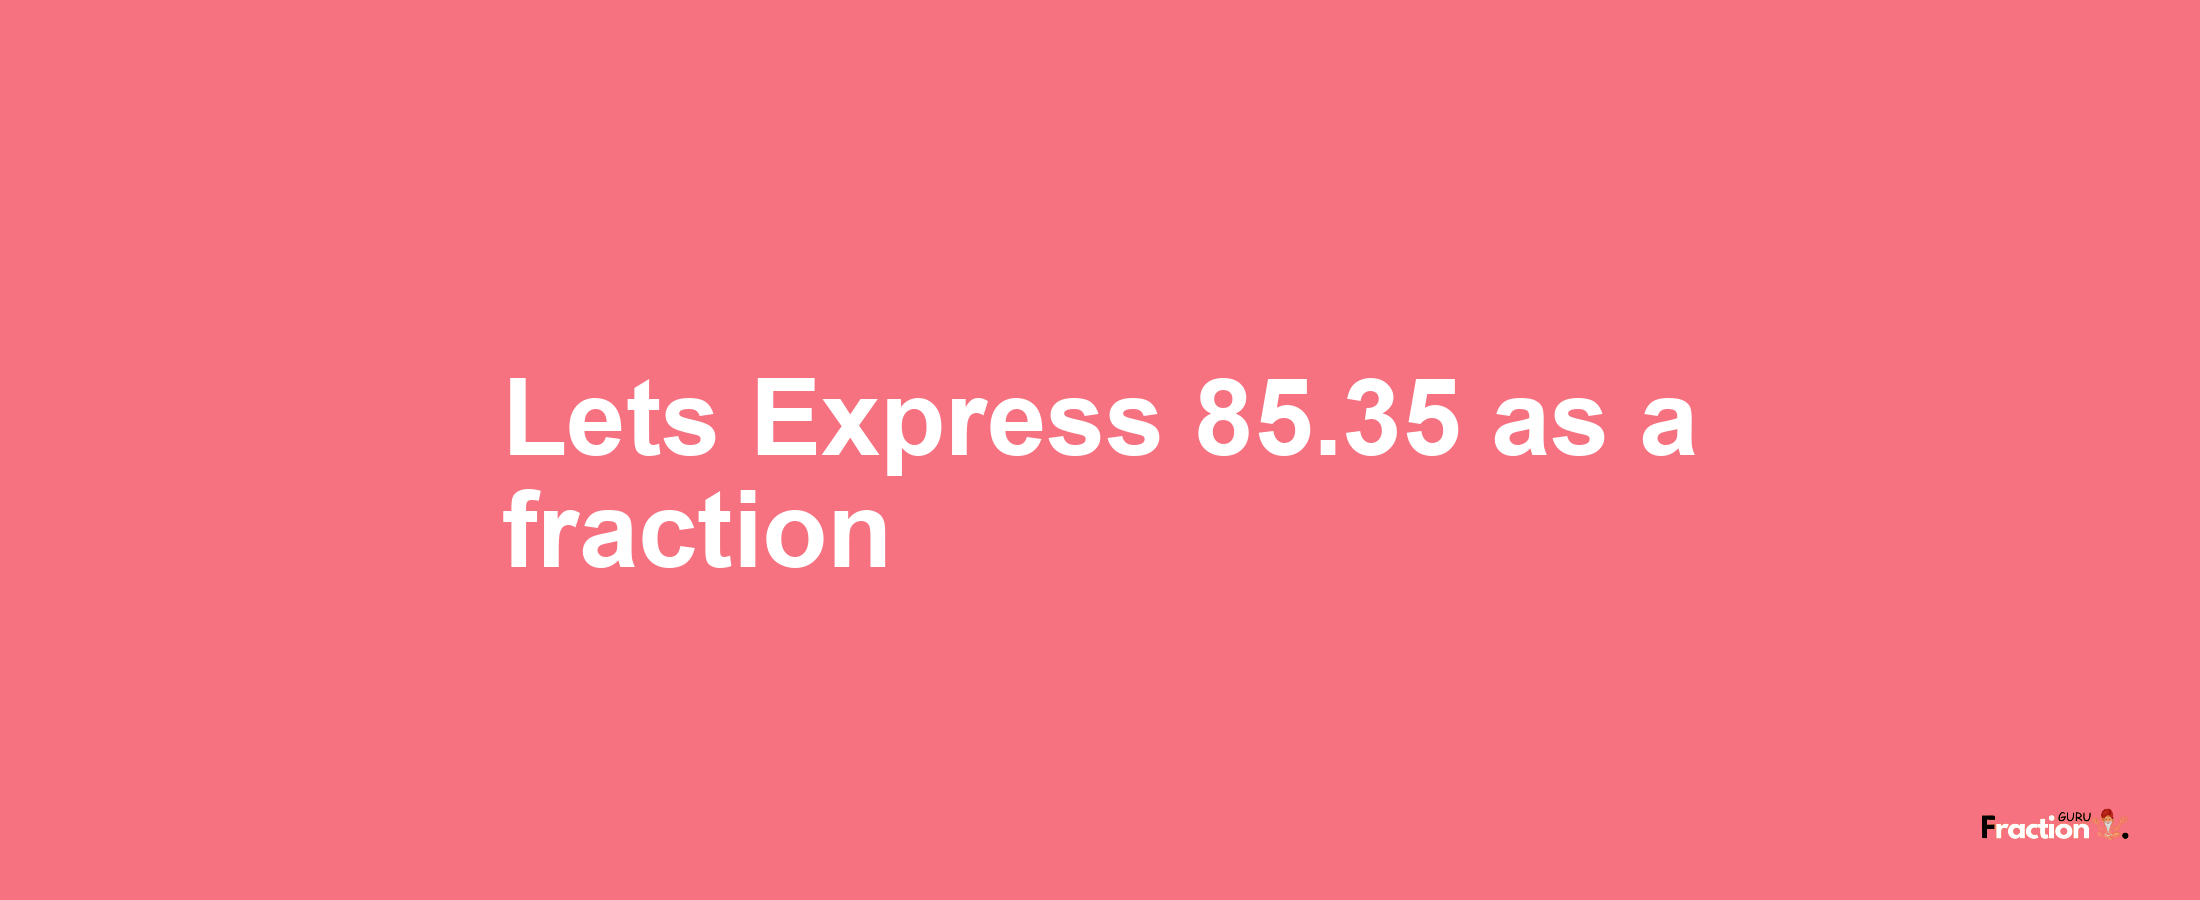 Lets Express 85.35 as afraction